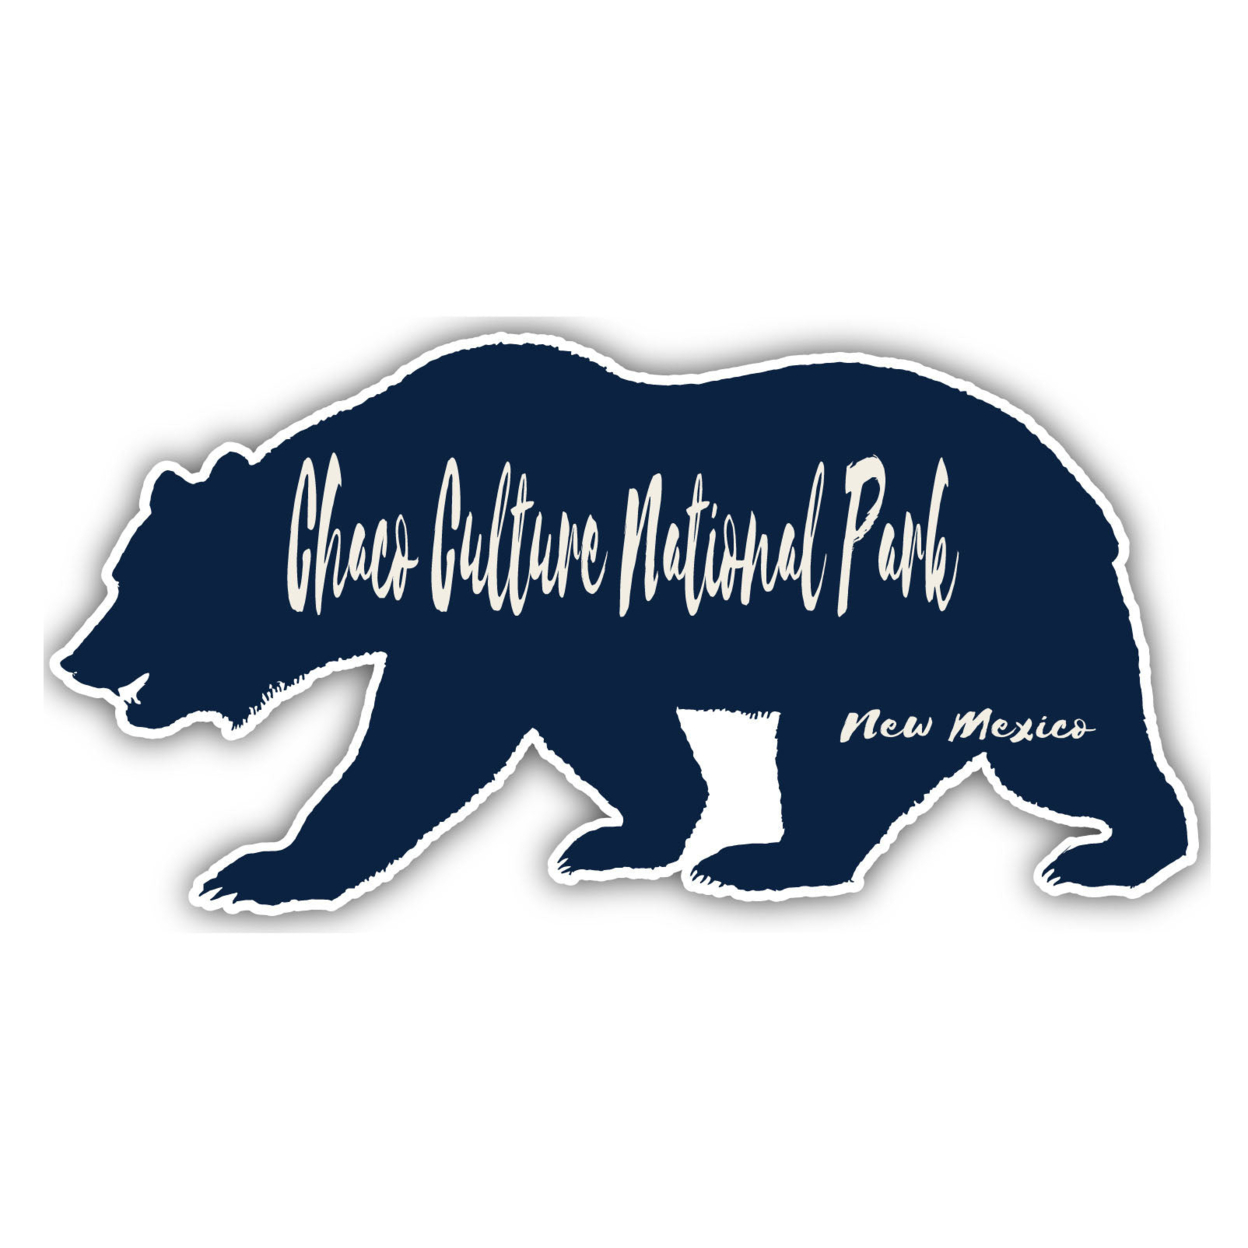 Chaco Culture National Park New Mexico Souvenir Decorative Stickers (Choose Theme And Size) - 4-Pack, 4-Inch, Bear